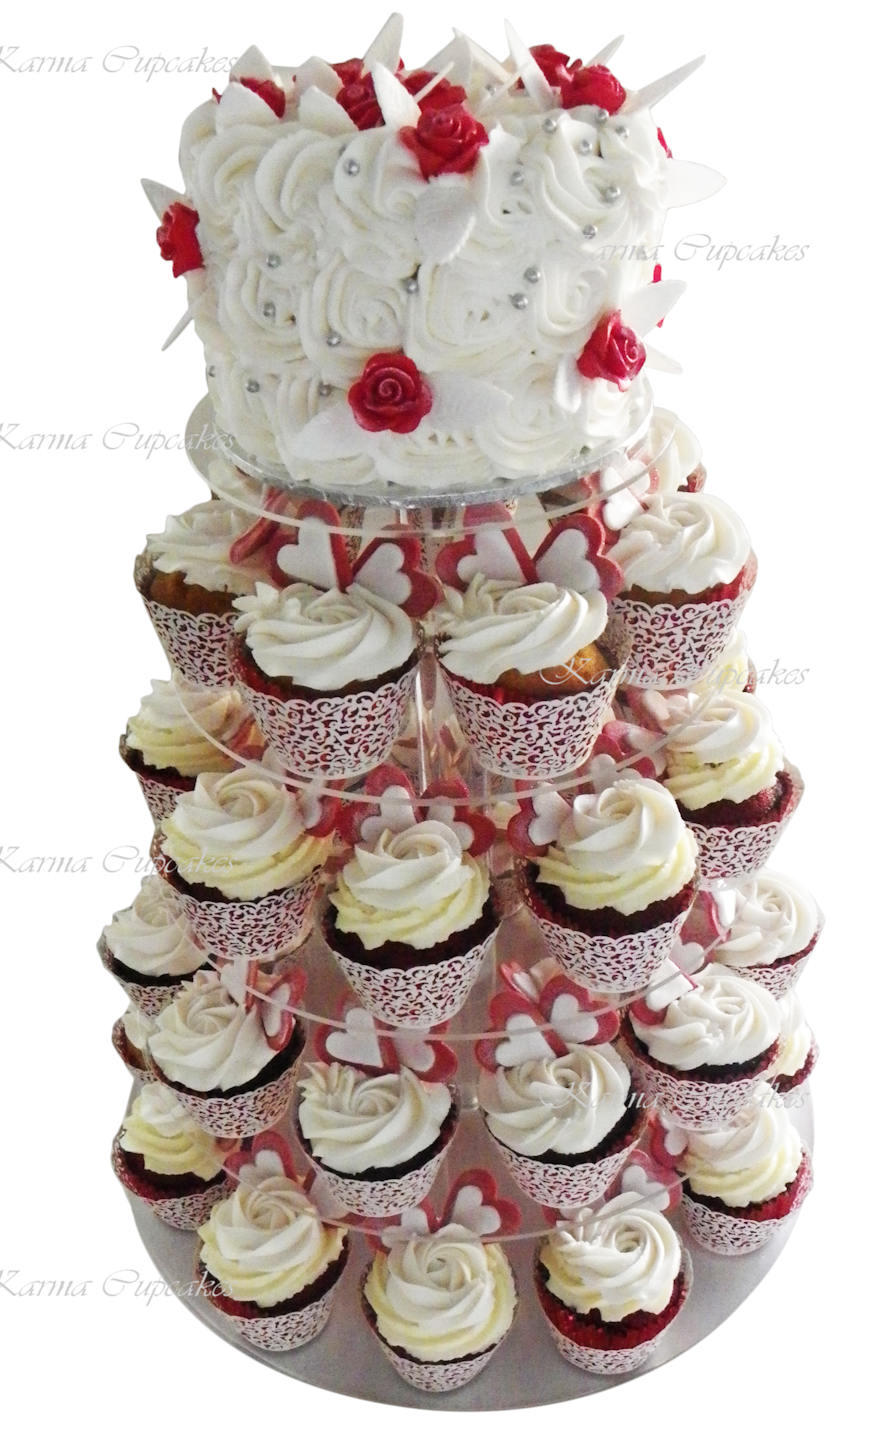 Karma Cupcakes white cake with edible red roses and matching cupcakes copy